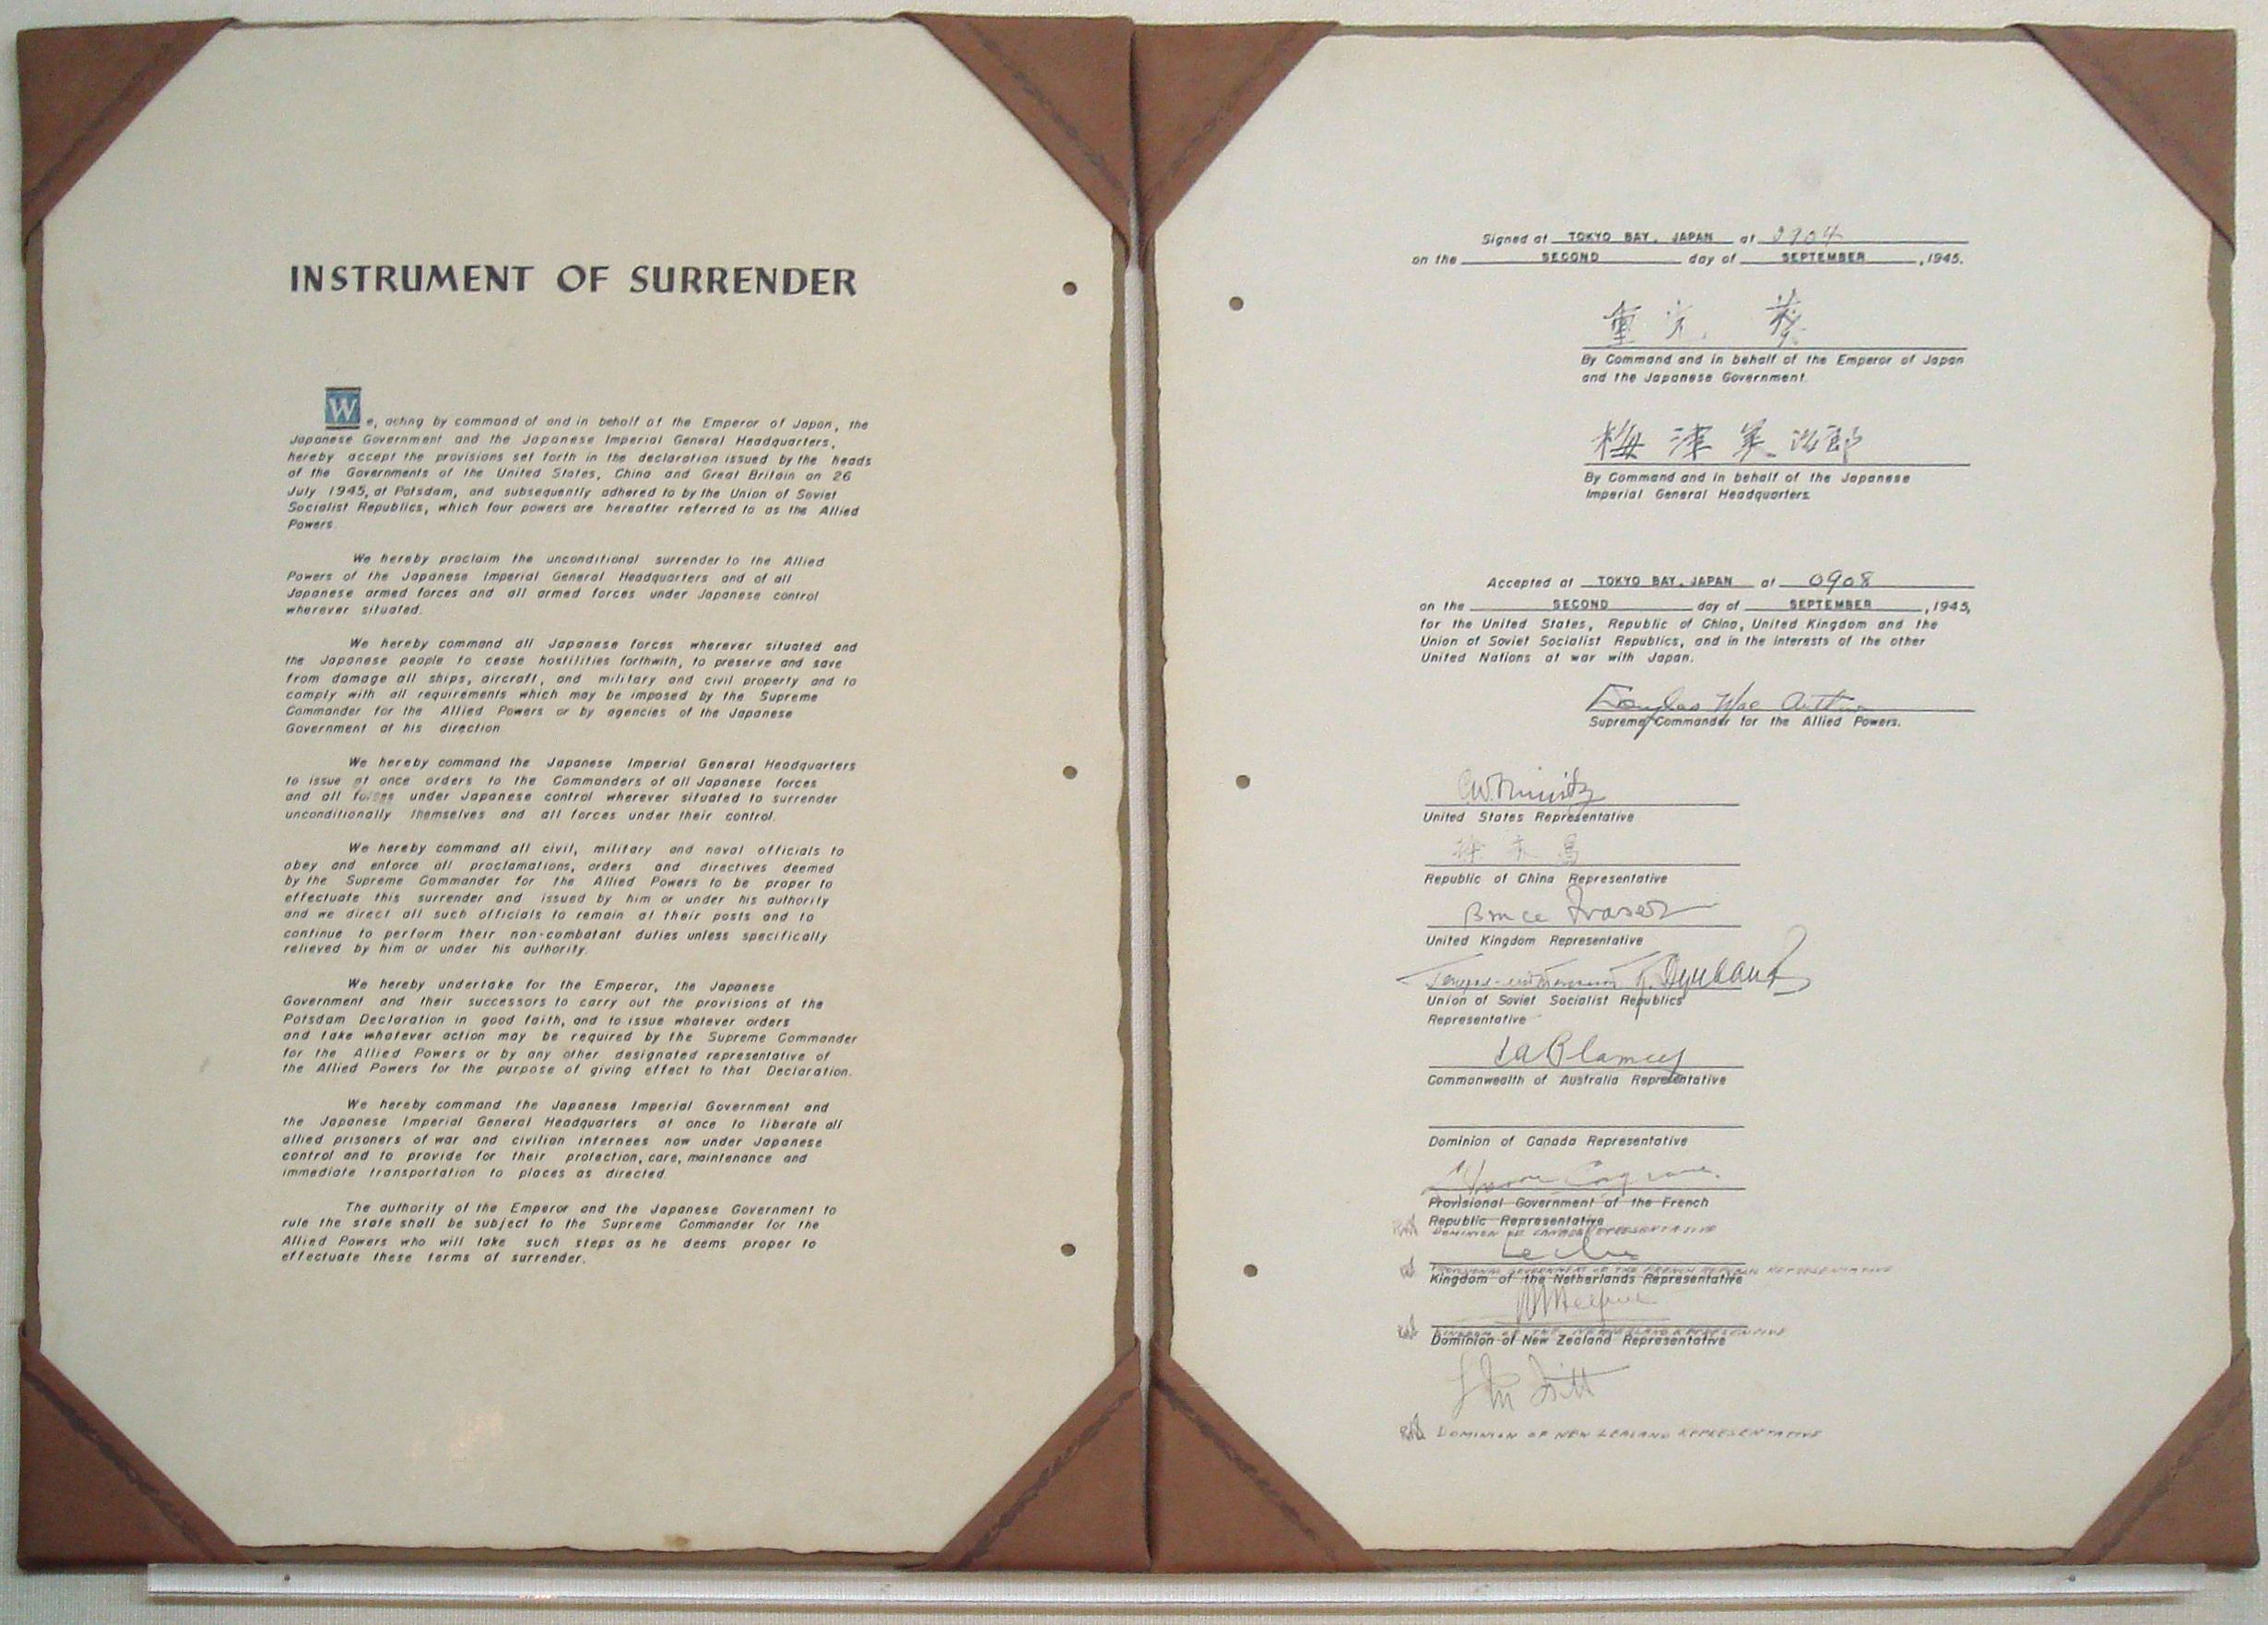 Japanese copy of the Instrument of Surrender signed aboard USS Missouri in Tokyo Bay on 2 Sep 1945. Note General Sutherland’s handwritten corrections after Col Lawrence Cosgrave of Canada signed on the wrong line